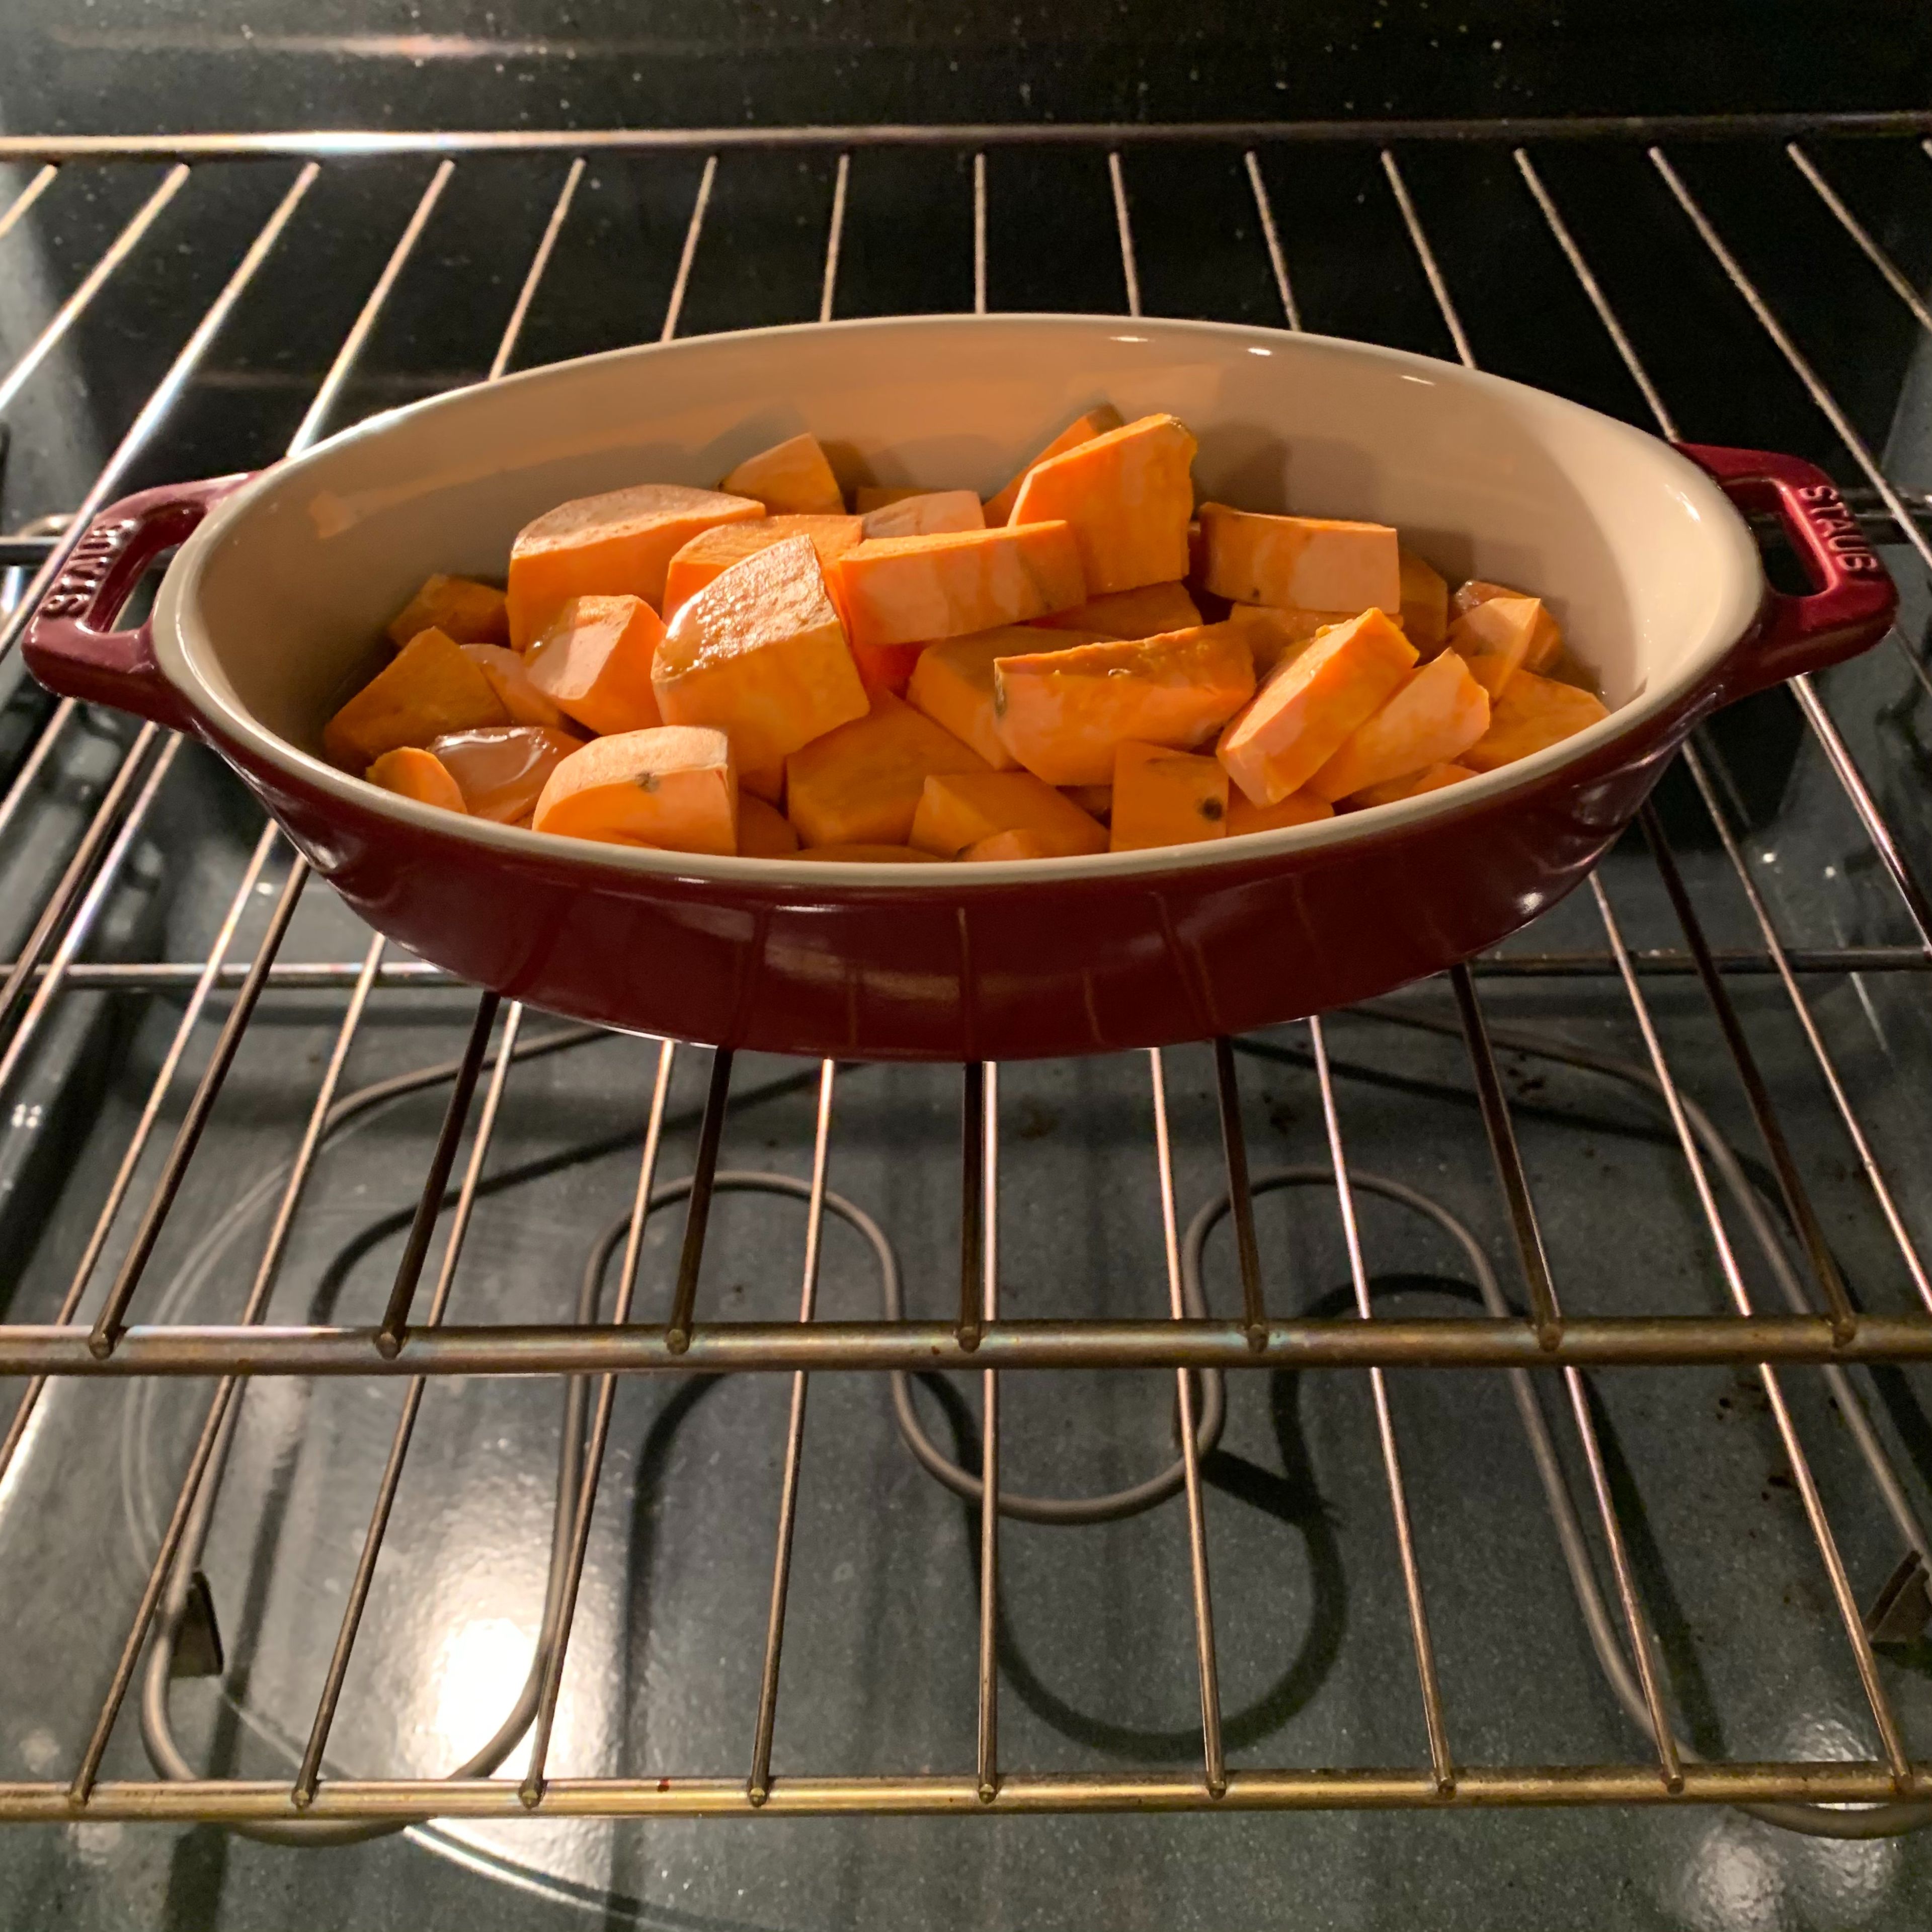 Bake sweet potatoes for 40 minutes at 375F/190C or until soft.